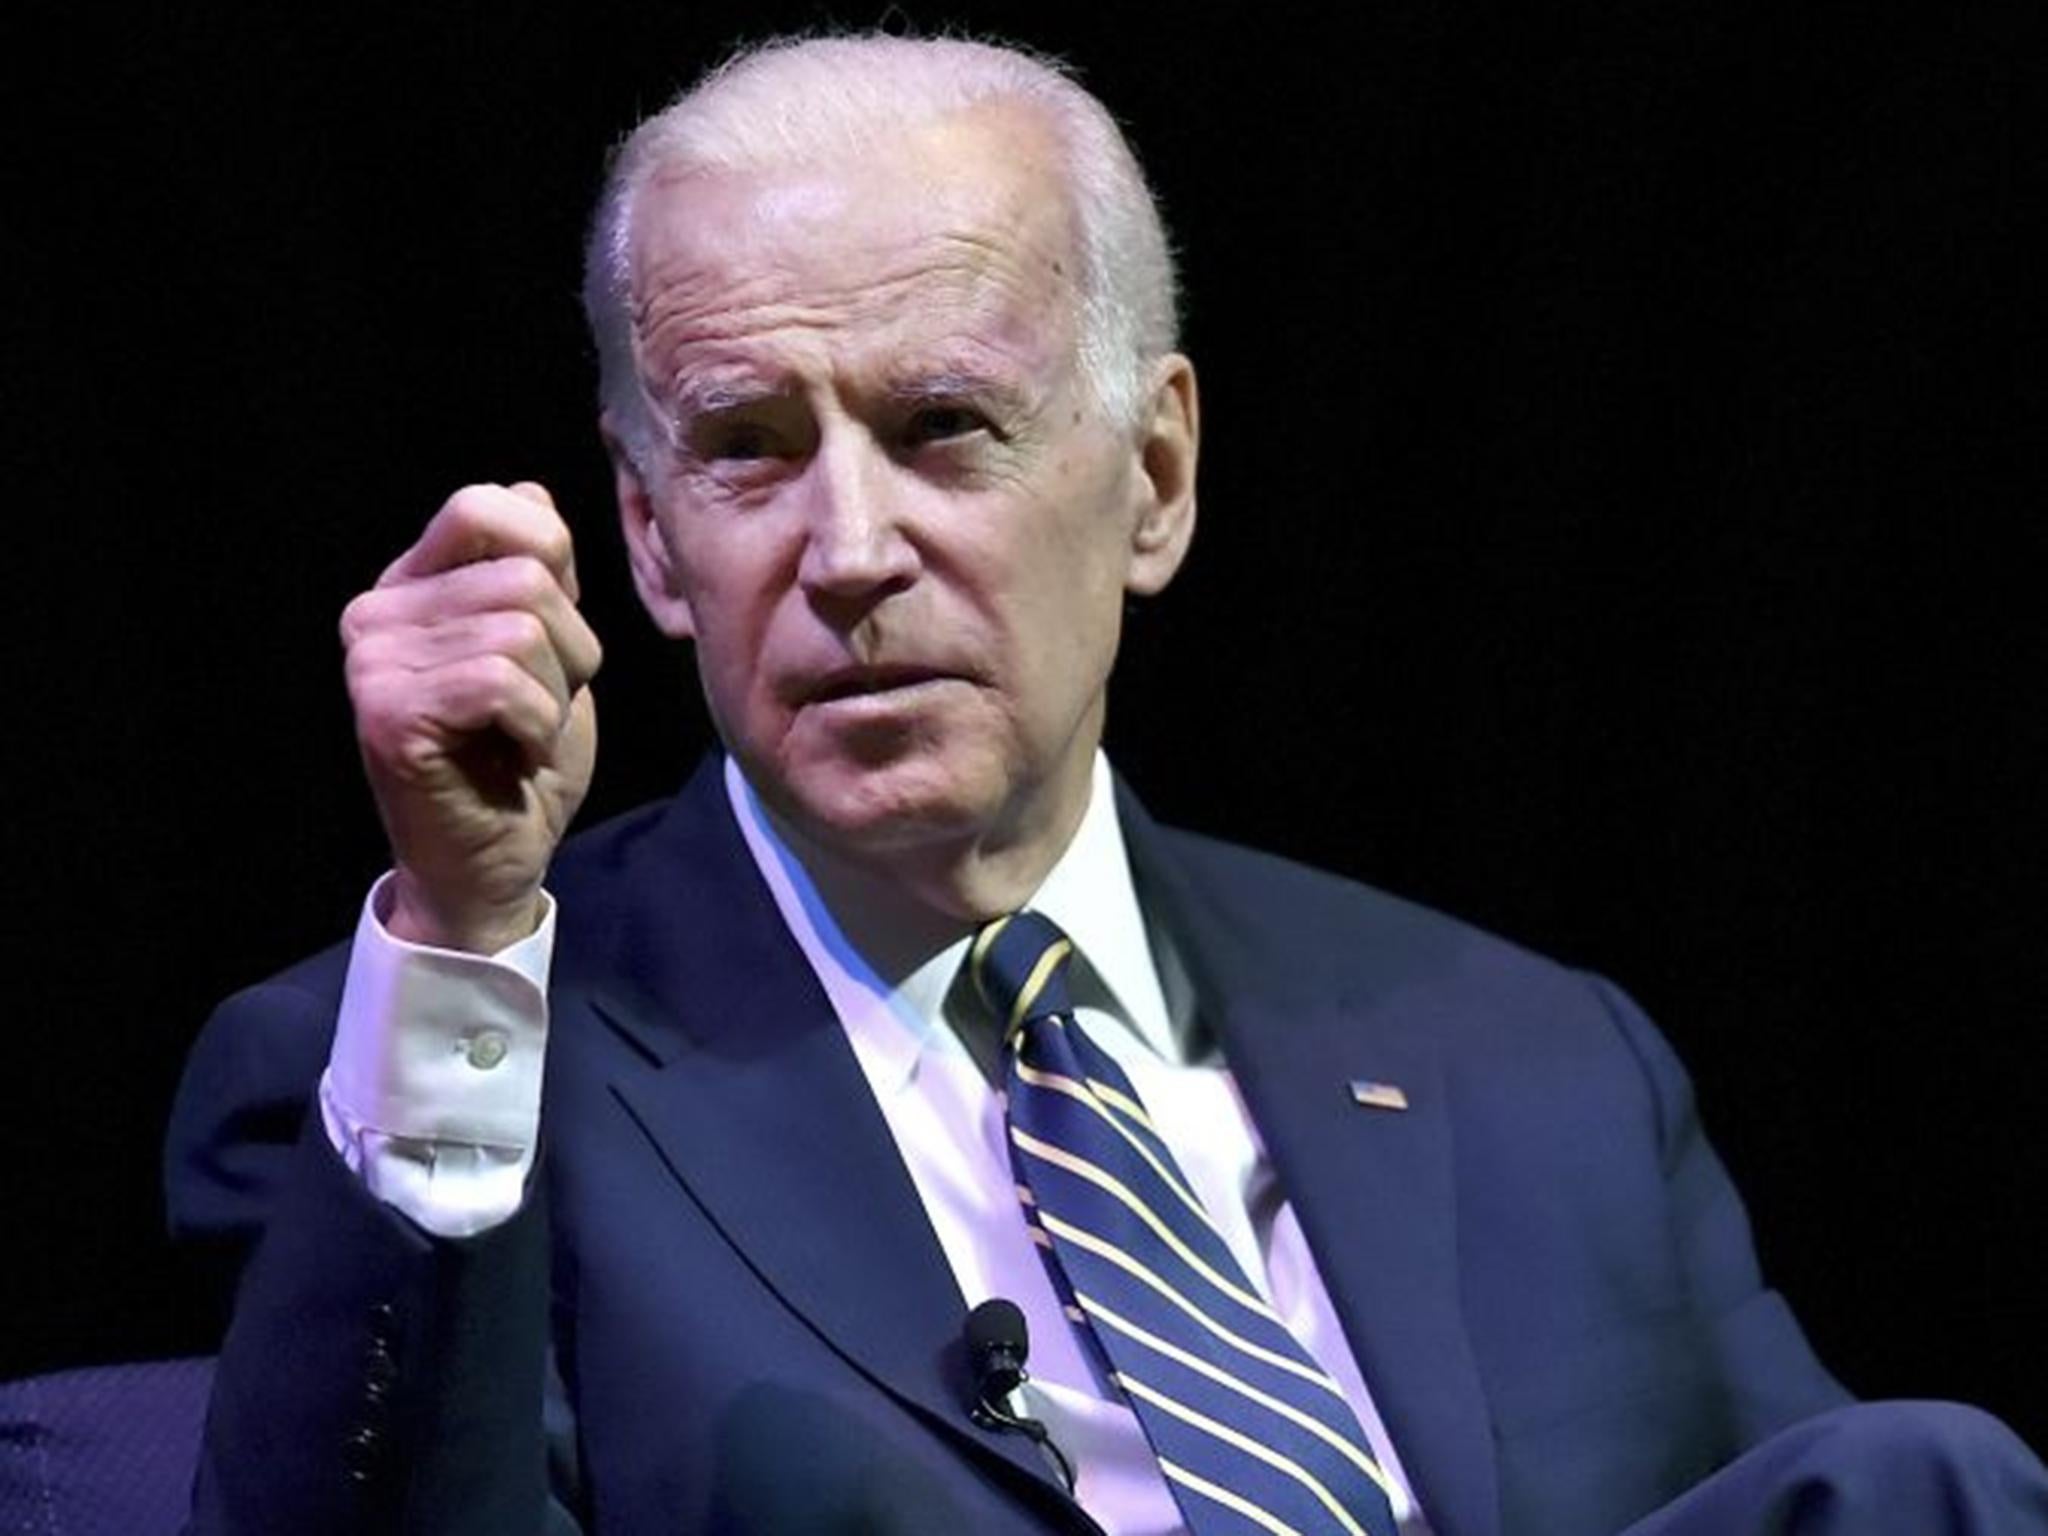 Joe Biden is one of the few national Democrats thought to be able to connect with the white rural voters